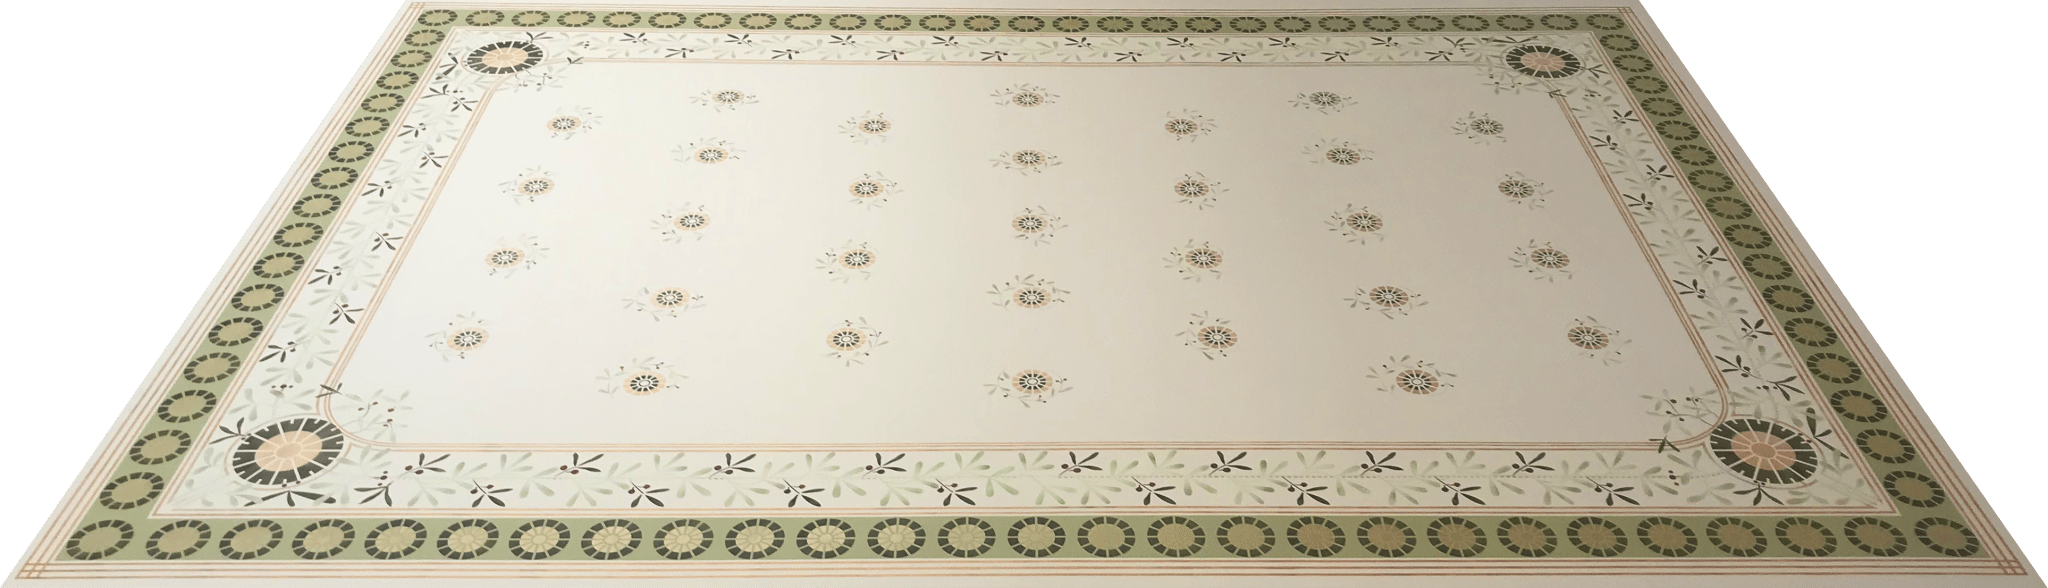 A full view from the long side of this floorcloth based on a wallpaper ceiling pattern from a Robert Graves & Co. catalog, c. 1889.